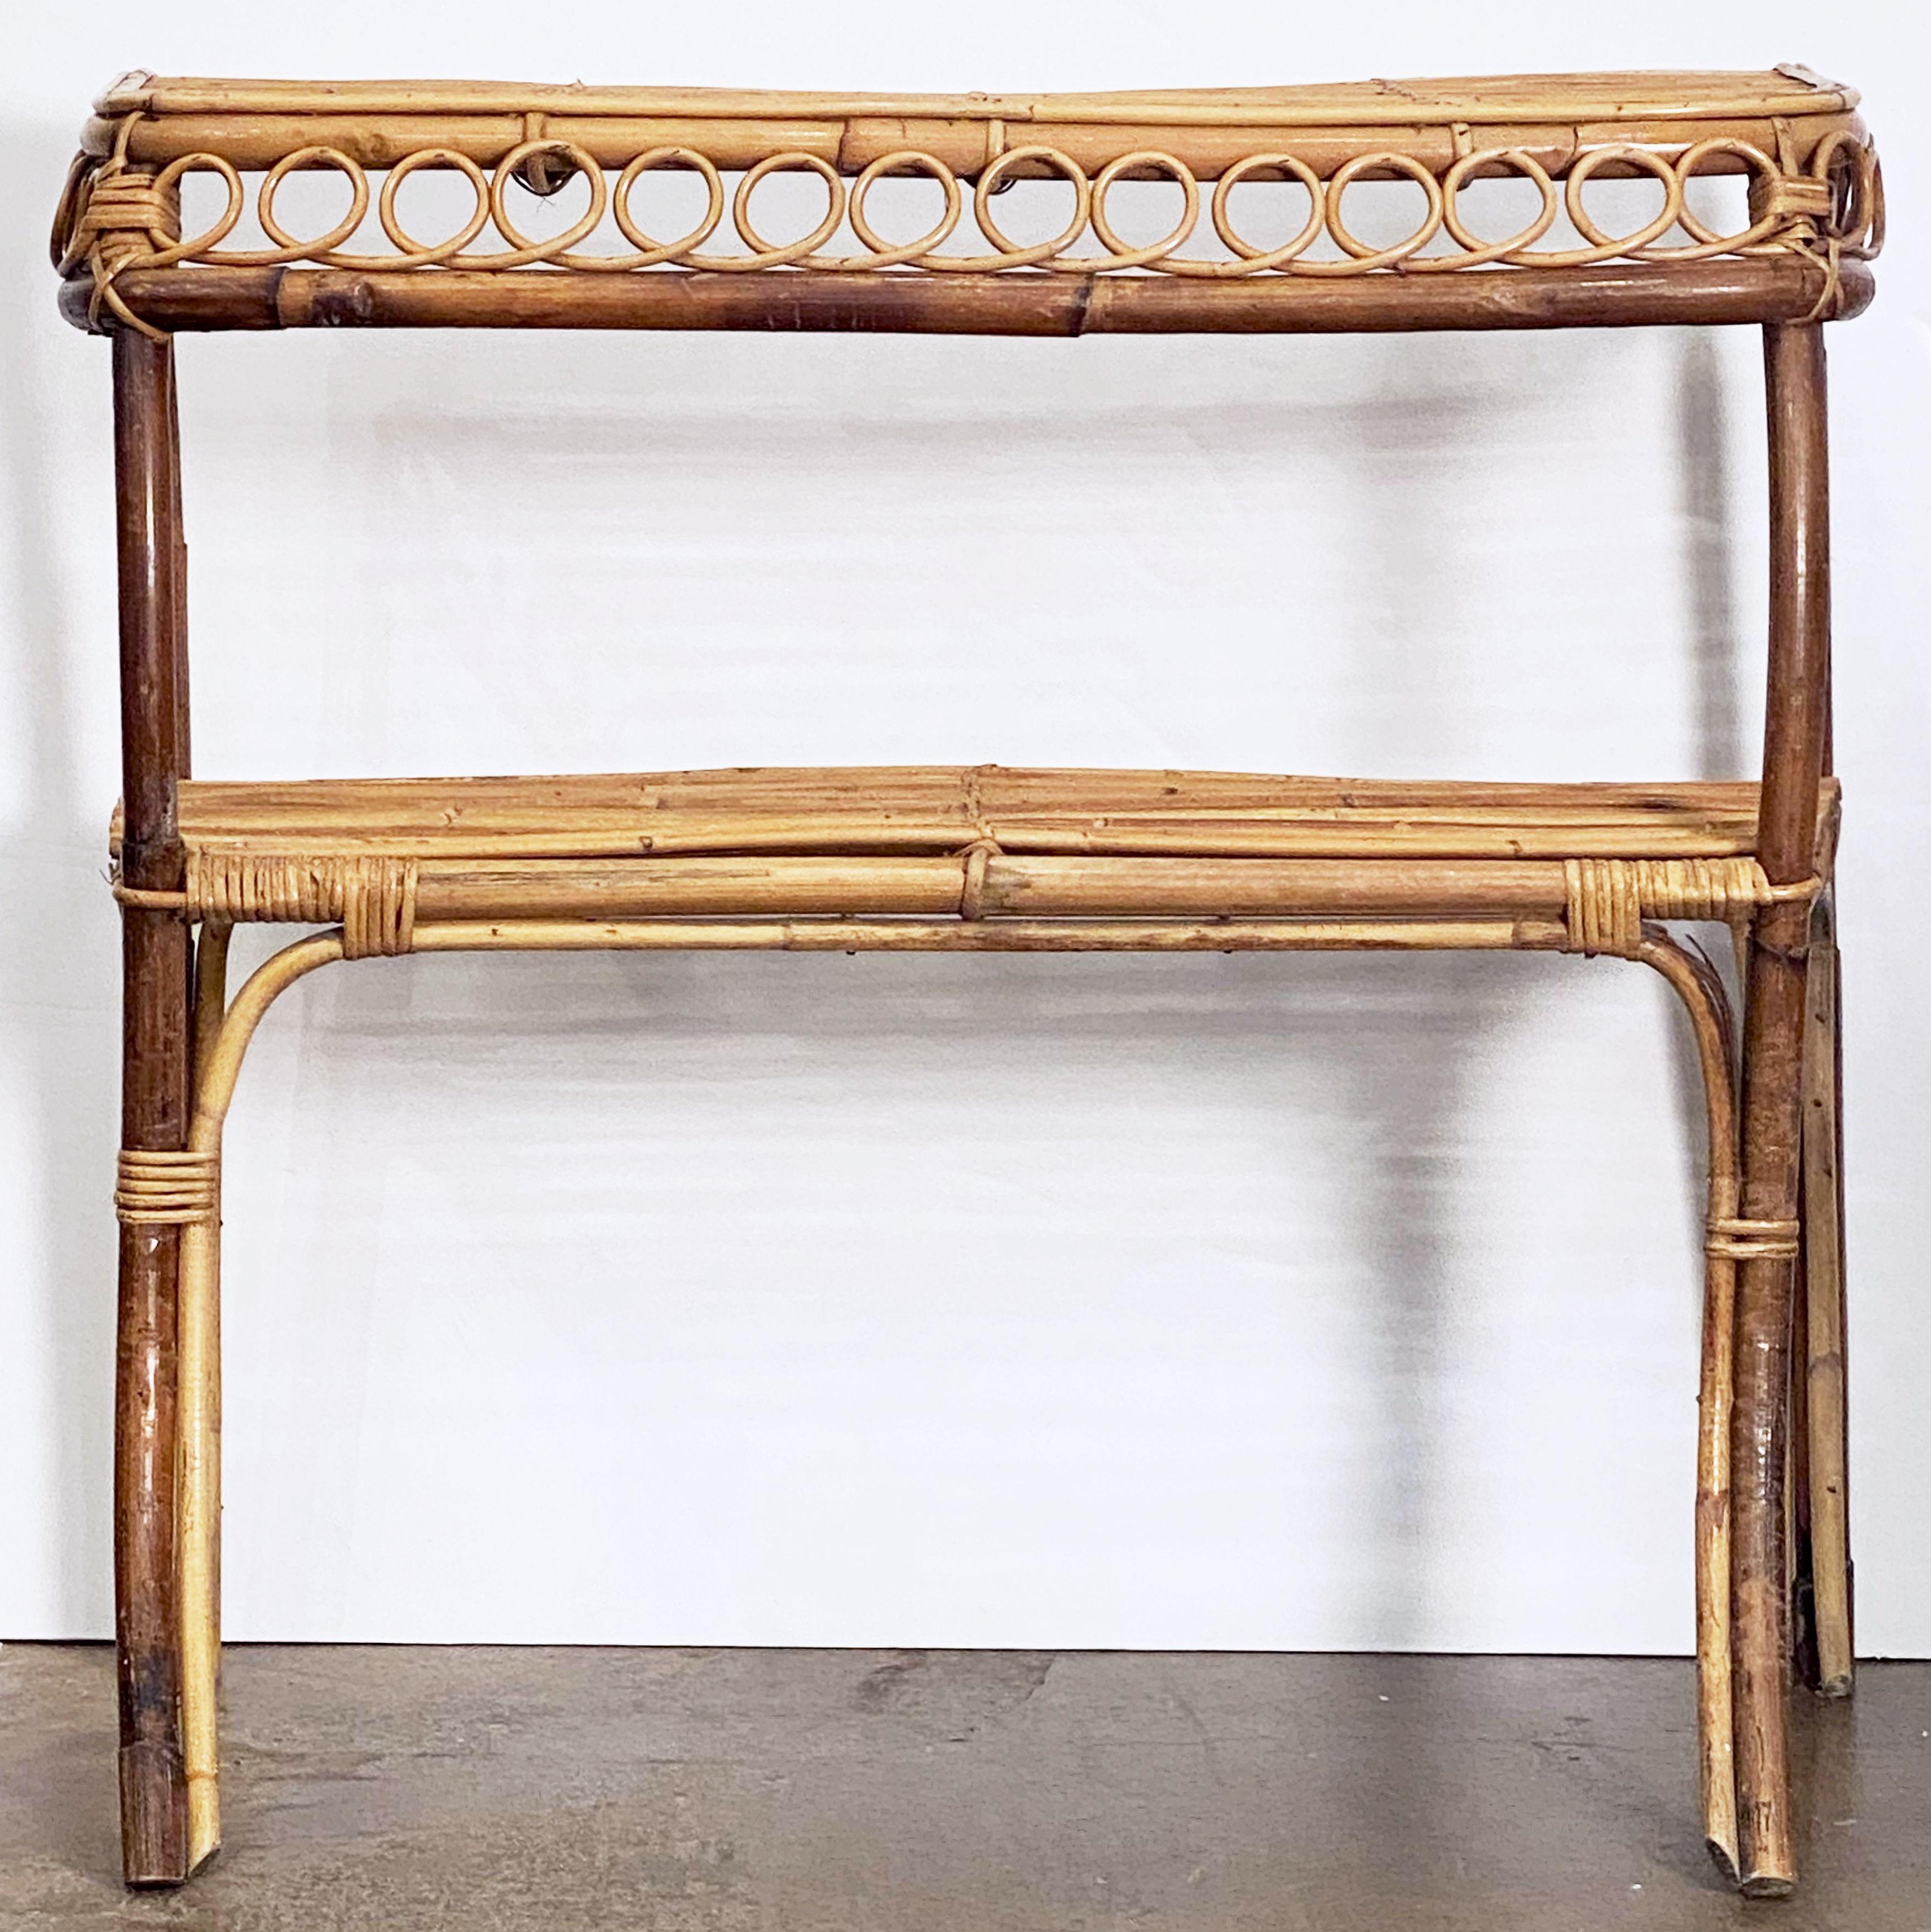 A fine Italian drinks bar for cocktails or console serving table of rattan, bamboo, and woven cane, featuring two tiers on a stylish frame of two facing serpentine legs and two two straight back legs.

Made in the style of Franco Albini in Italy